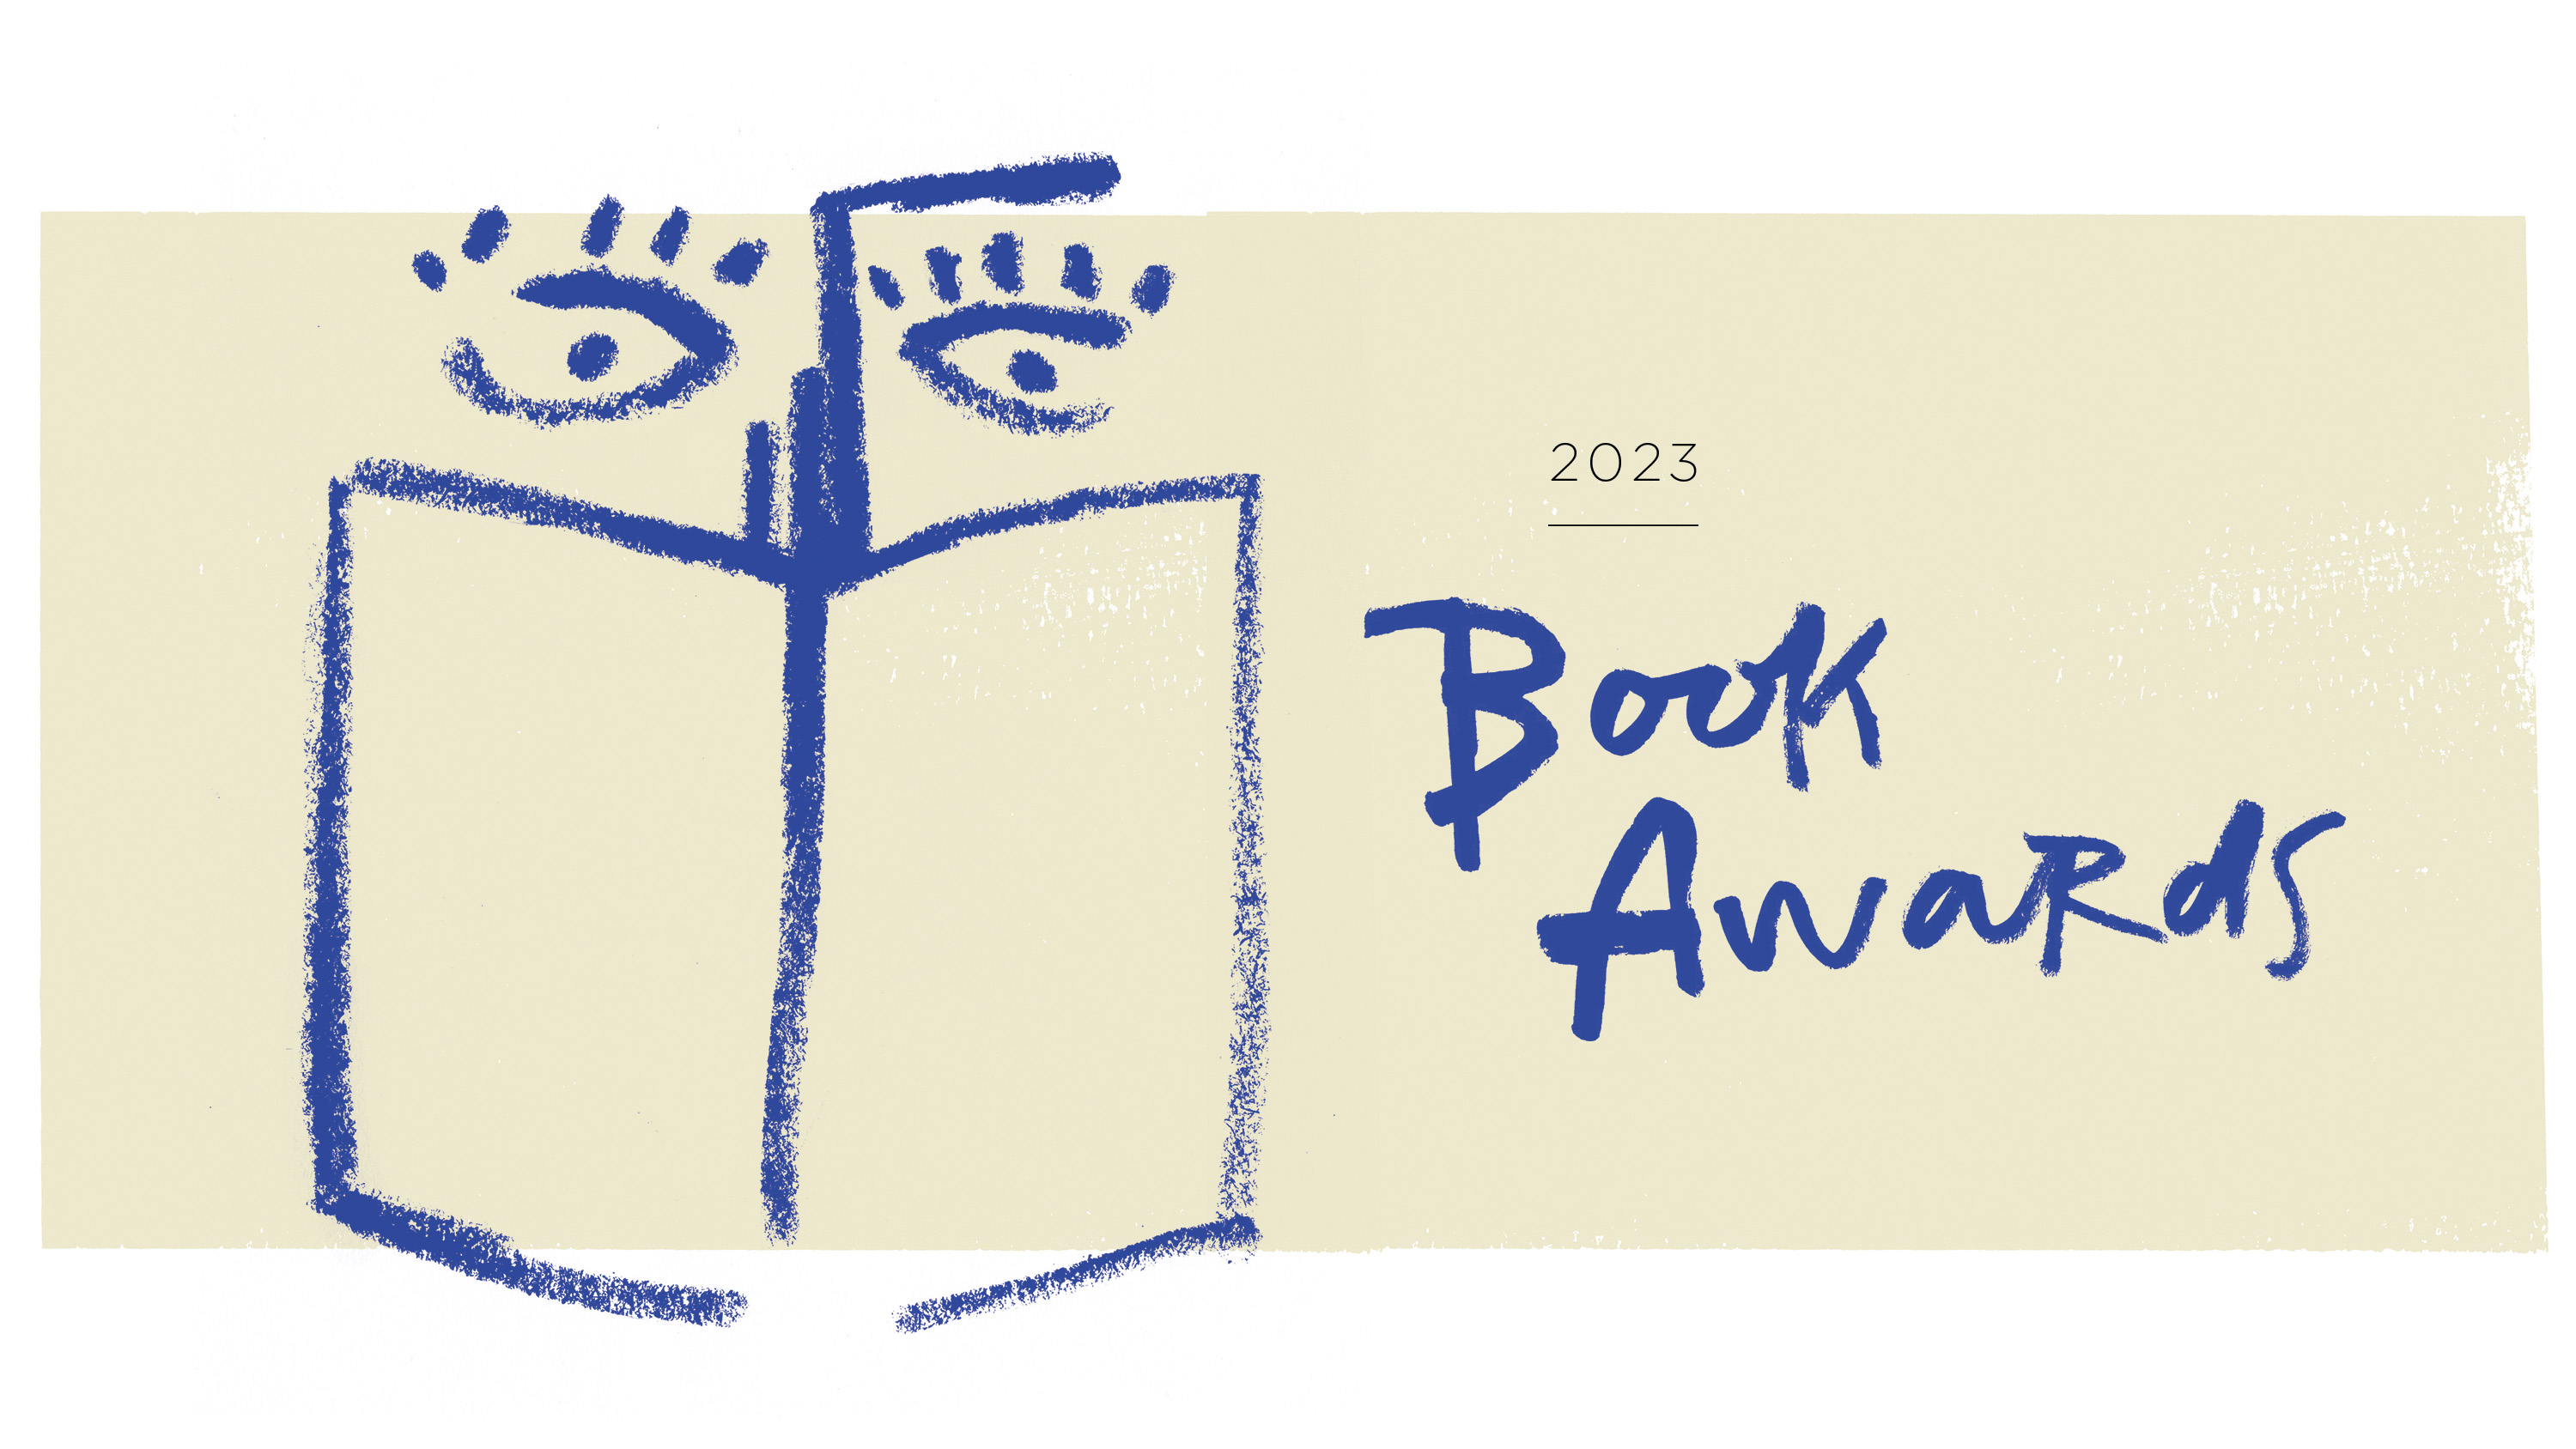 Christianity Today's 2023 Book Awards